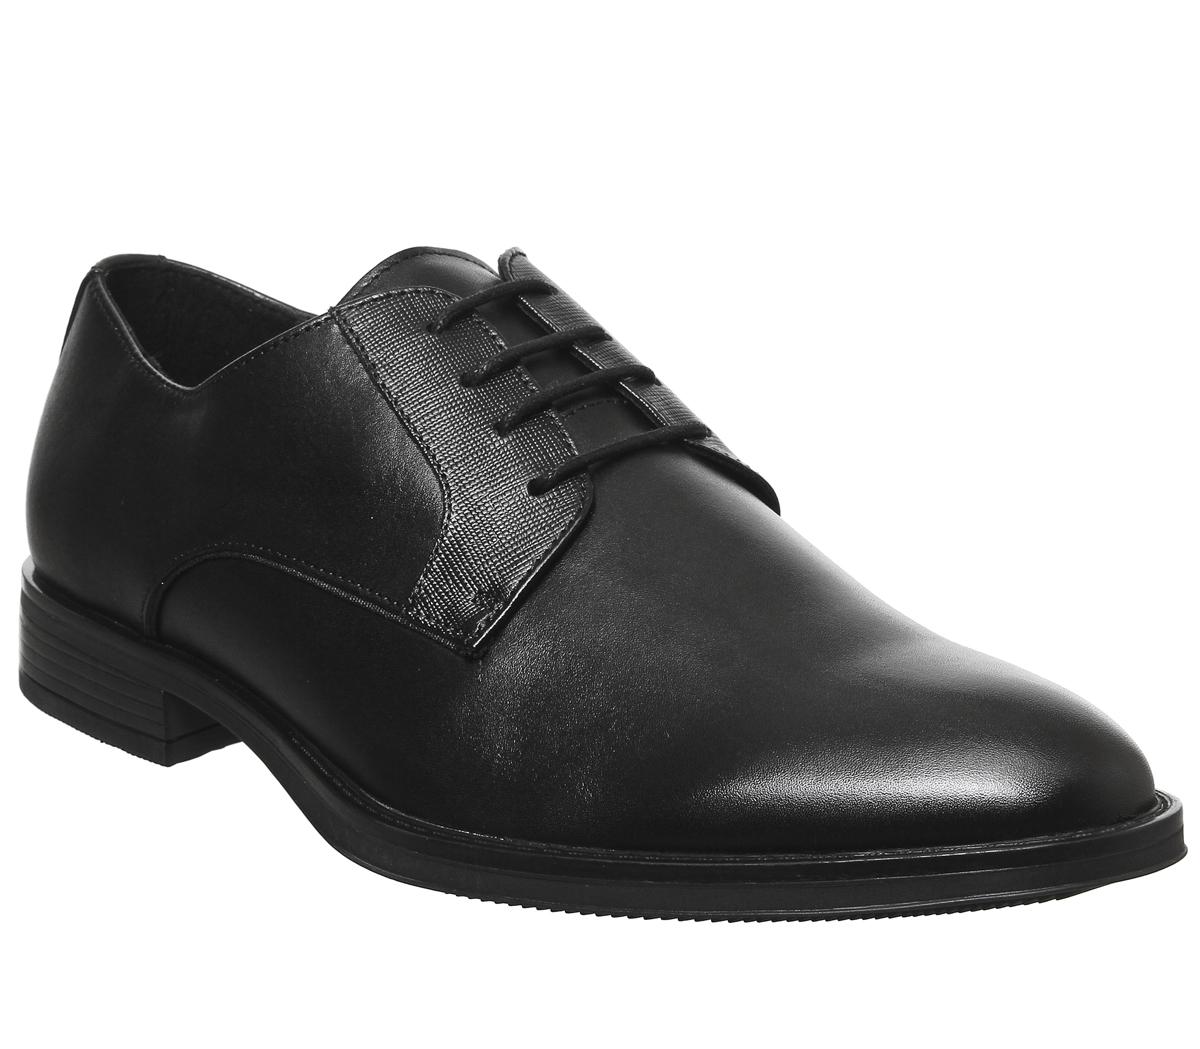 OFFICEMarker Gibson Smart ShoesBlack Leather